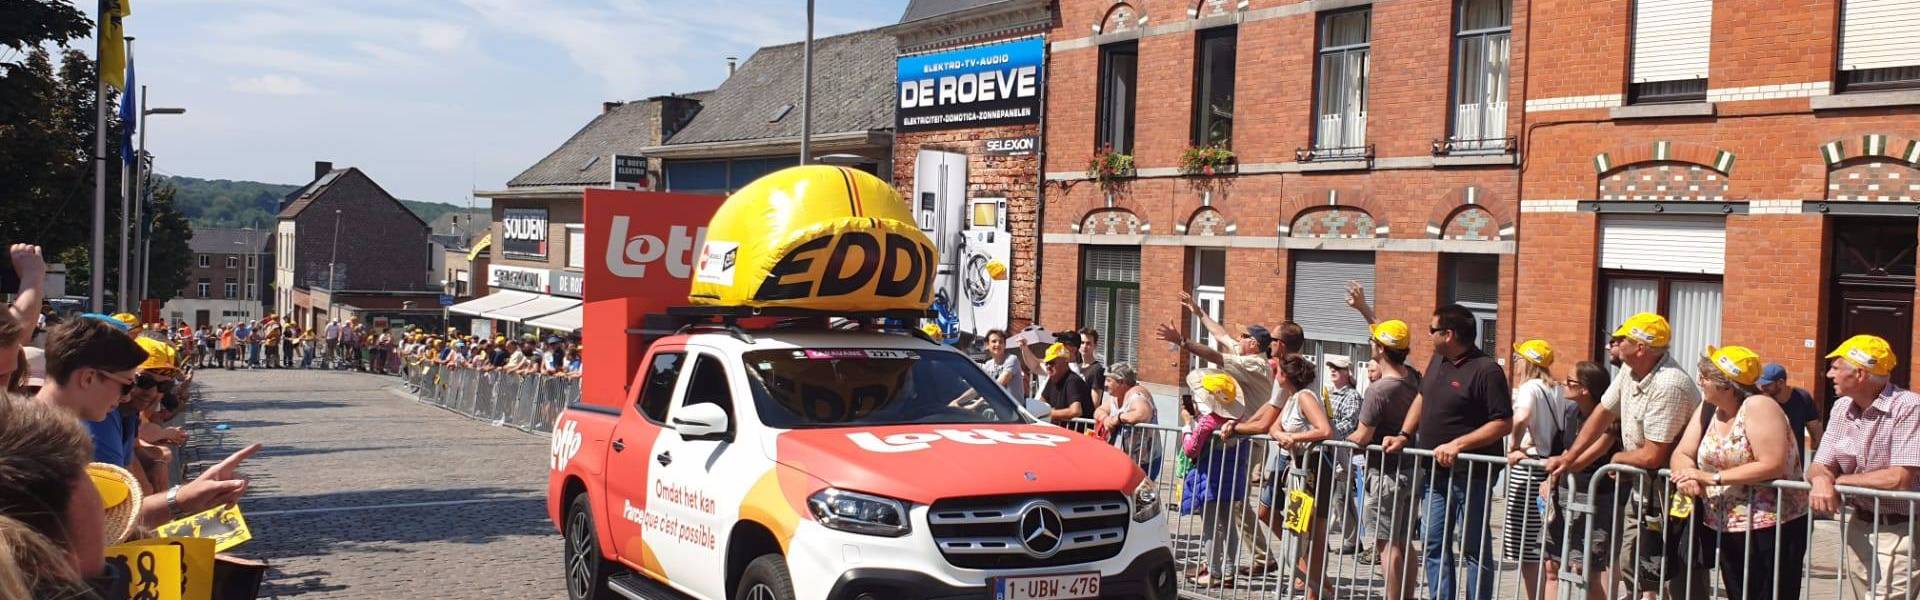 Large inflatable promotional material | X-Treme Creations inflatable yelllew cap Eddy Merckx  with Lotto branding on the sides in the heat of the action during a classic Belgian cyclist race produced for the Nationale Loterij Lotto E-Demonstrations X-Treme Creations